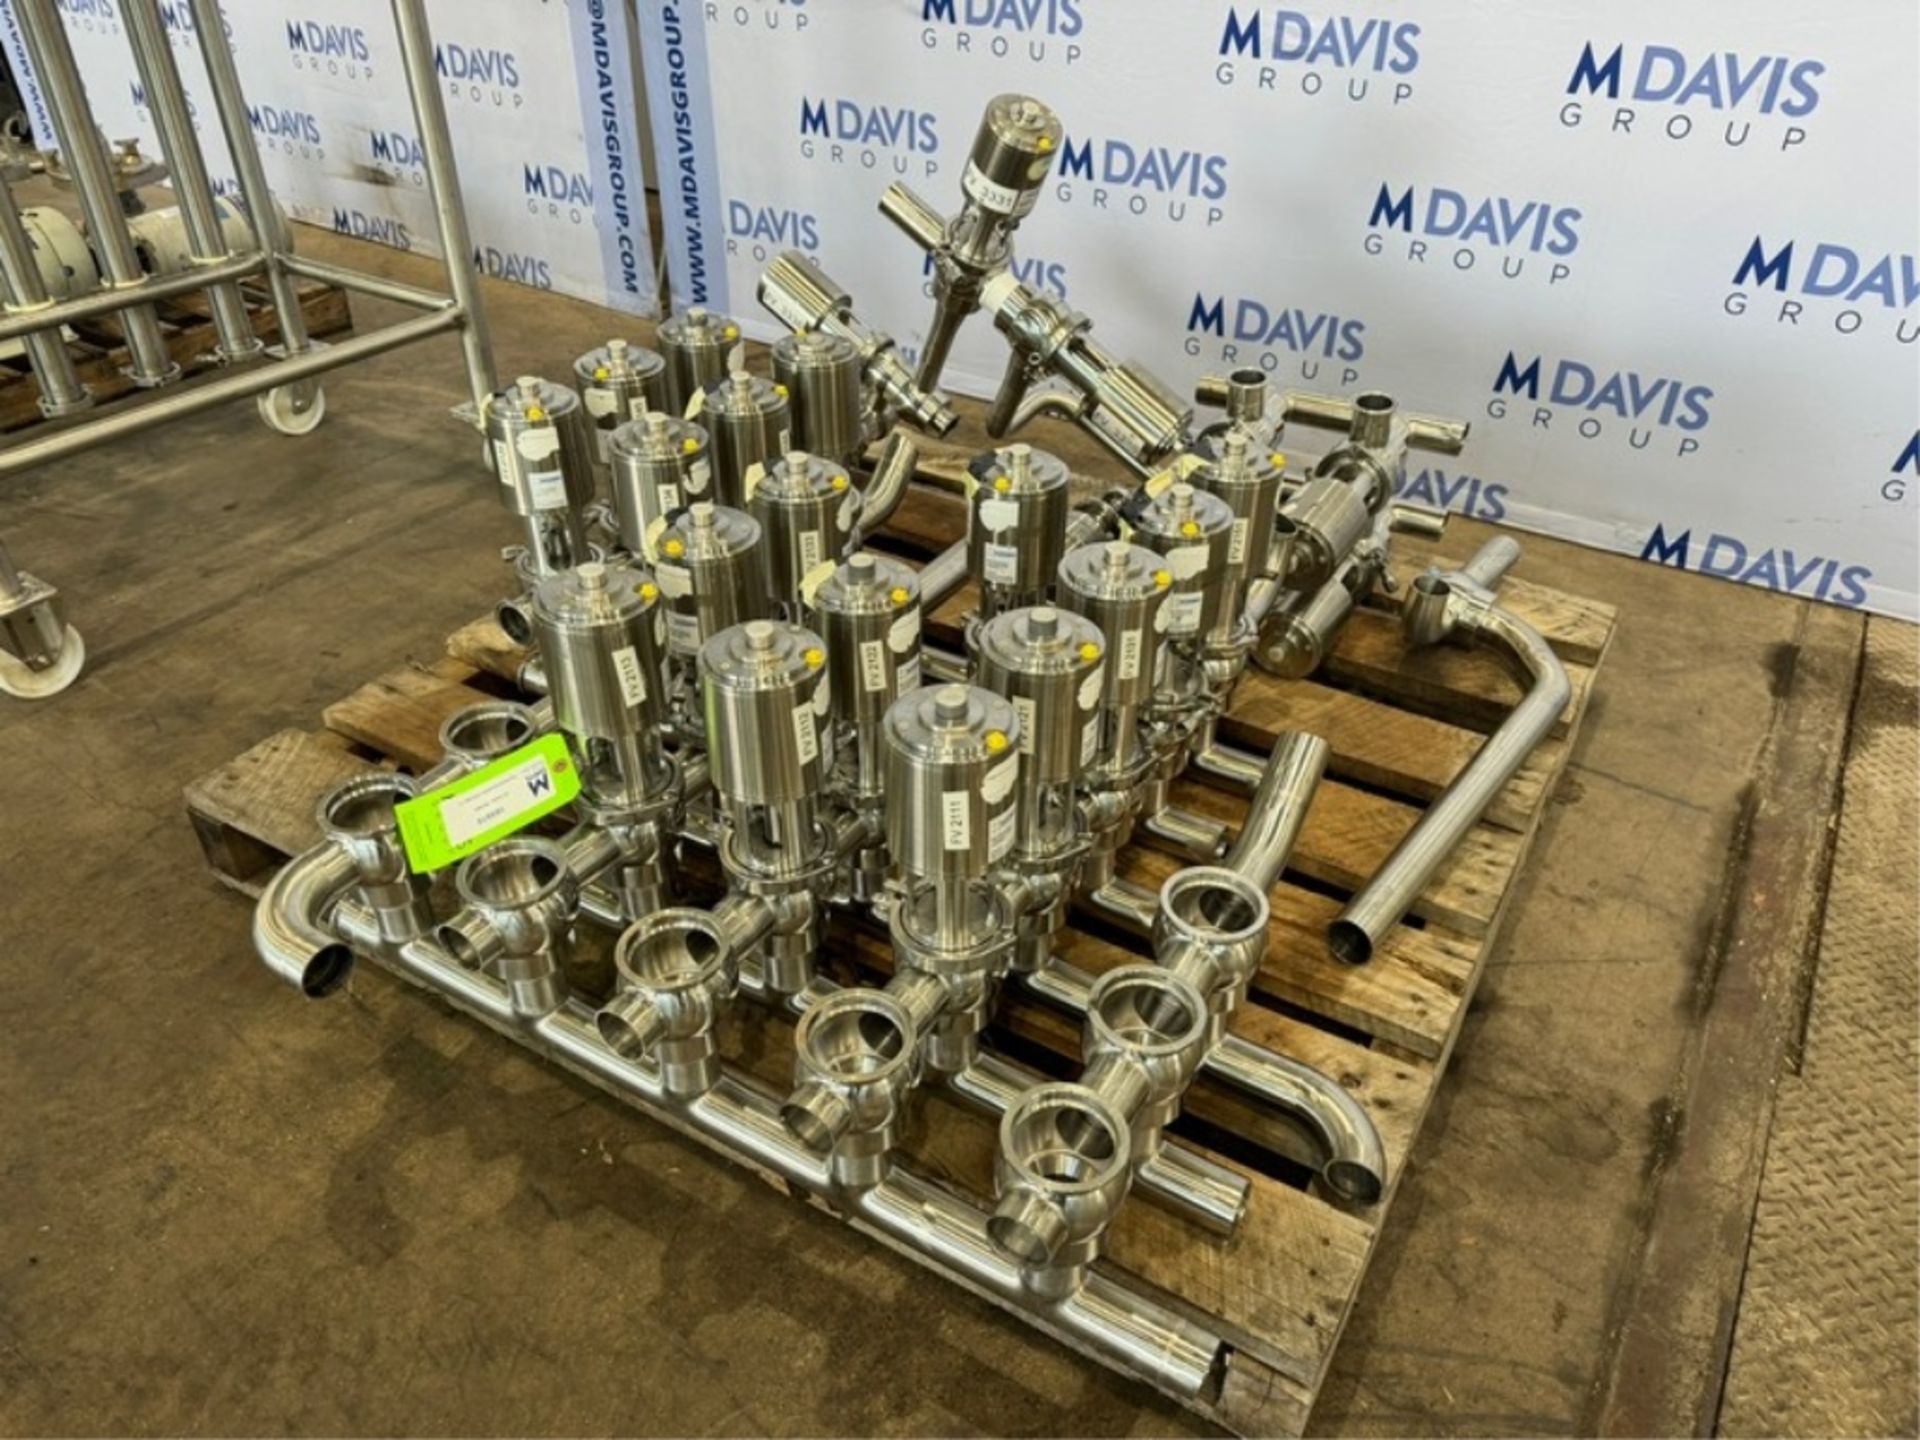 (21) Sudmo S/S Air Valves, with S/S Manifold (Inv. #103822) (LOCATED MONROEVILLE, PA) (RIGGING, - Image 2 of 5